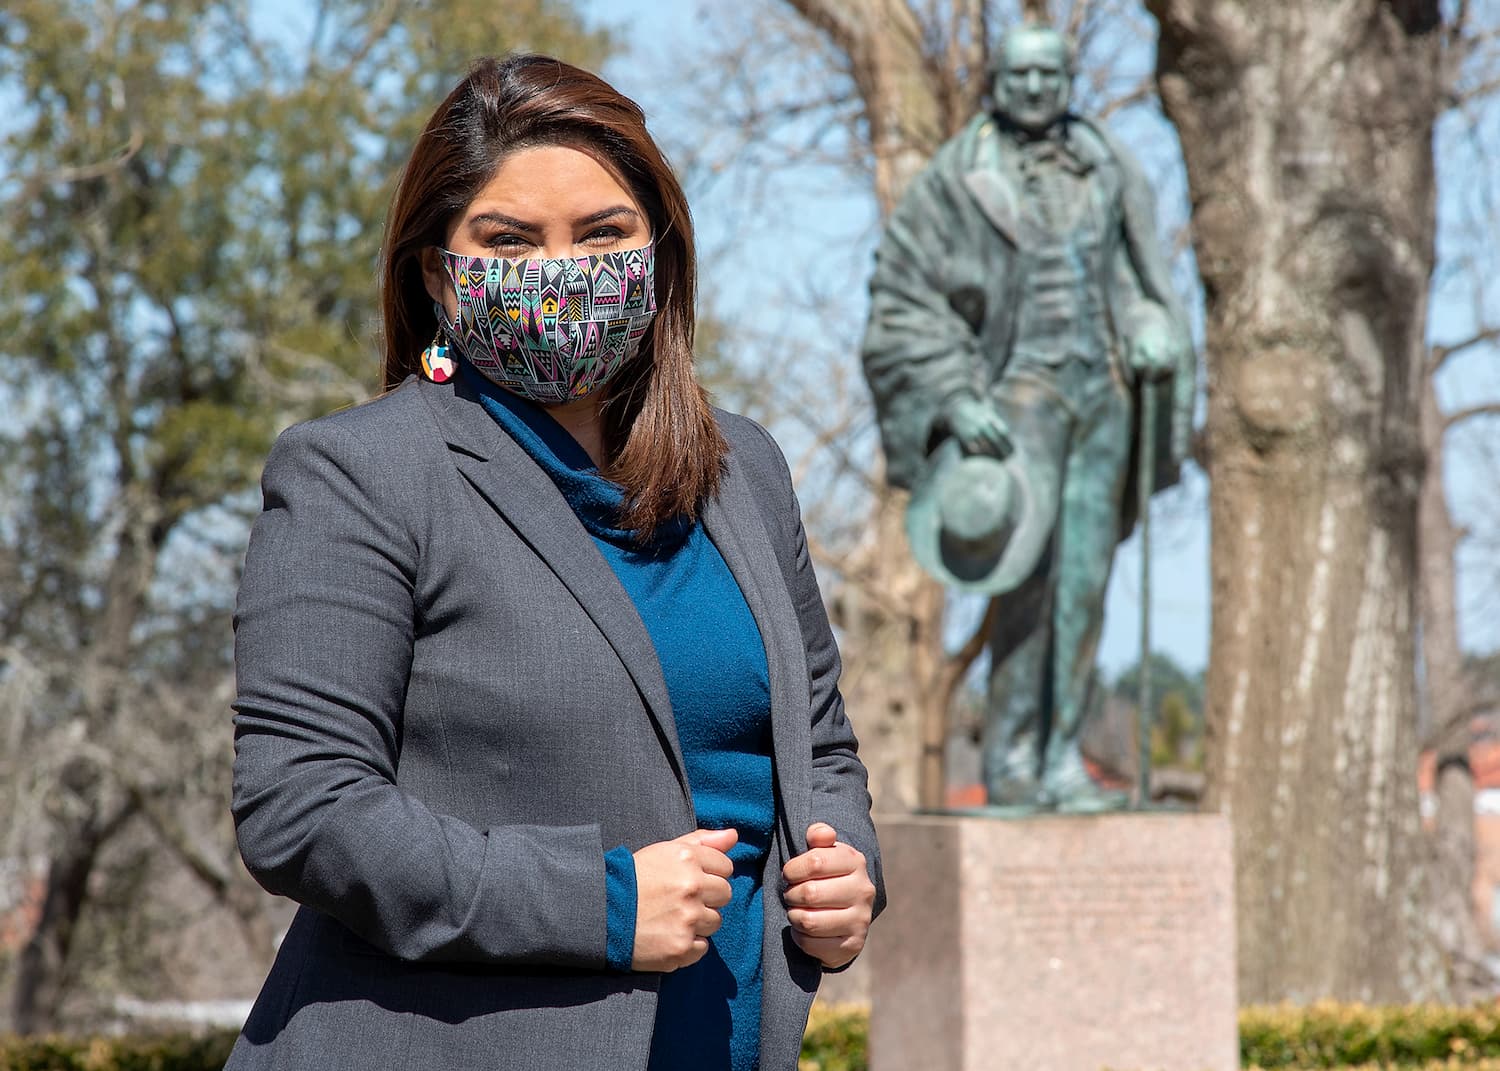 Fatima Hernandez looks professional as she stands outdoors on the SHSU campus.